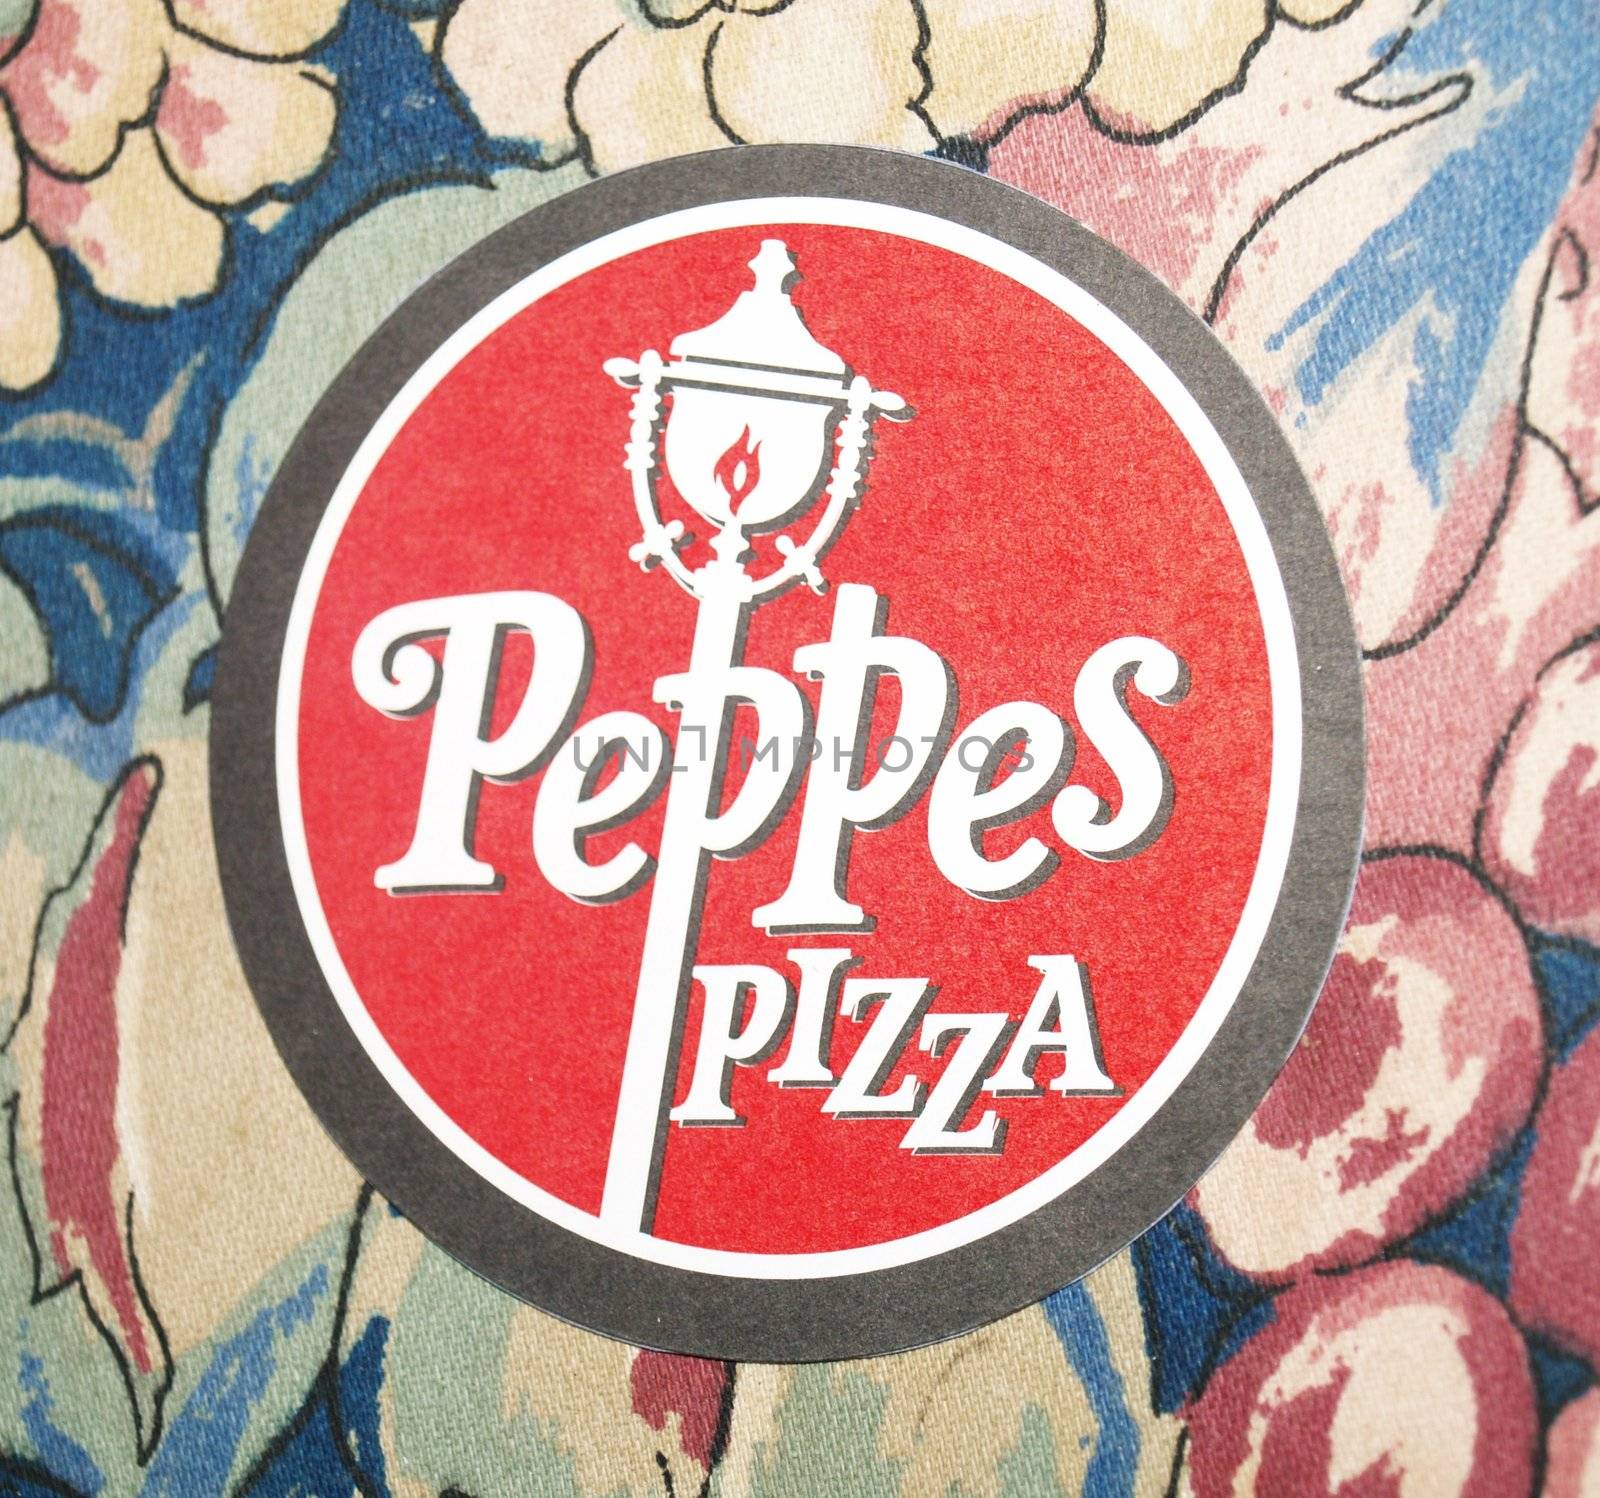 peppes pizza by viviolsen